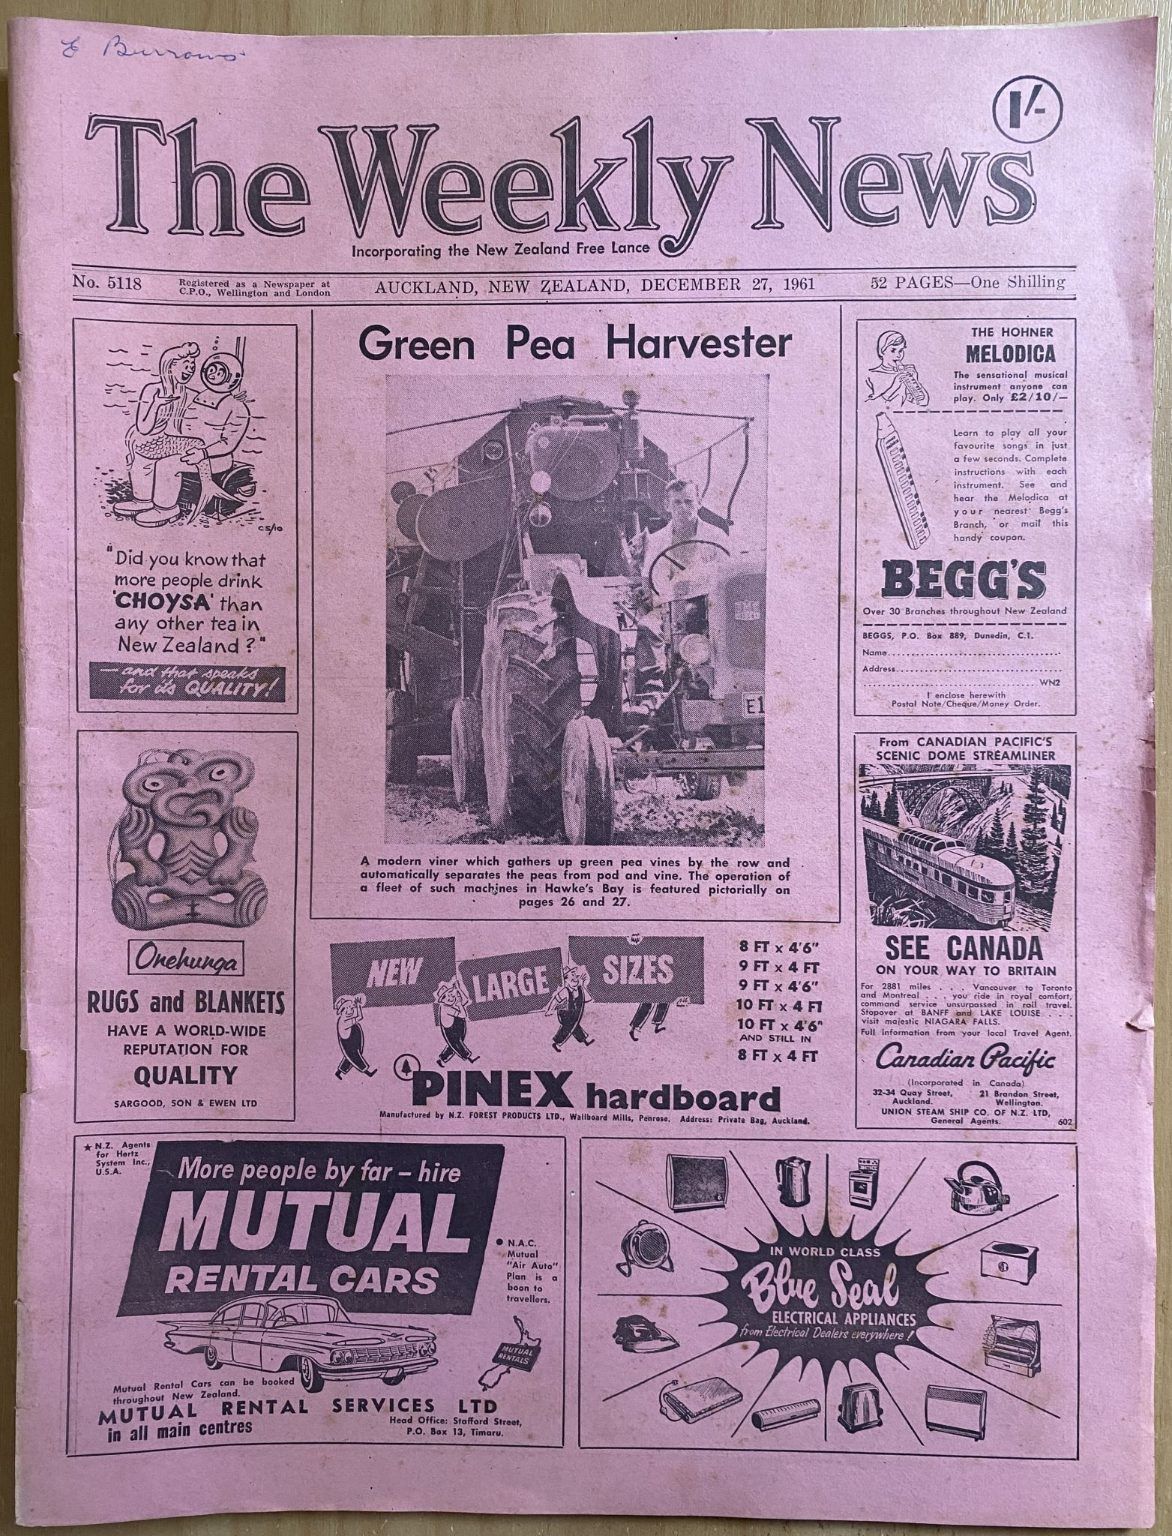 OLD NEWSPAPER: The Weekly News, No. 5118, 27 December 1961